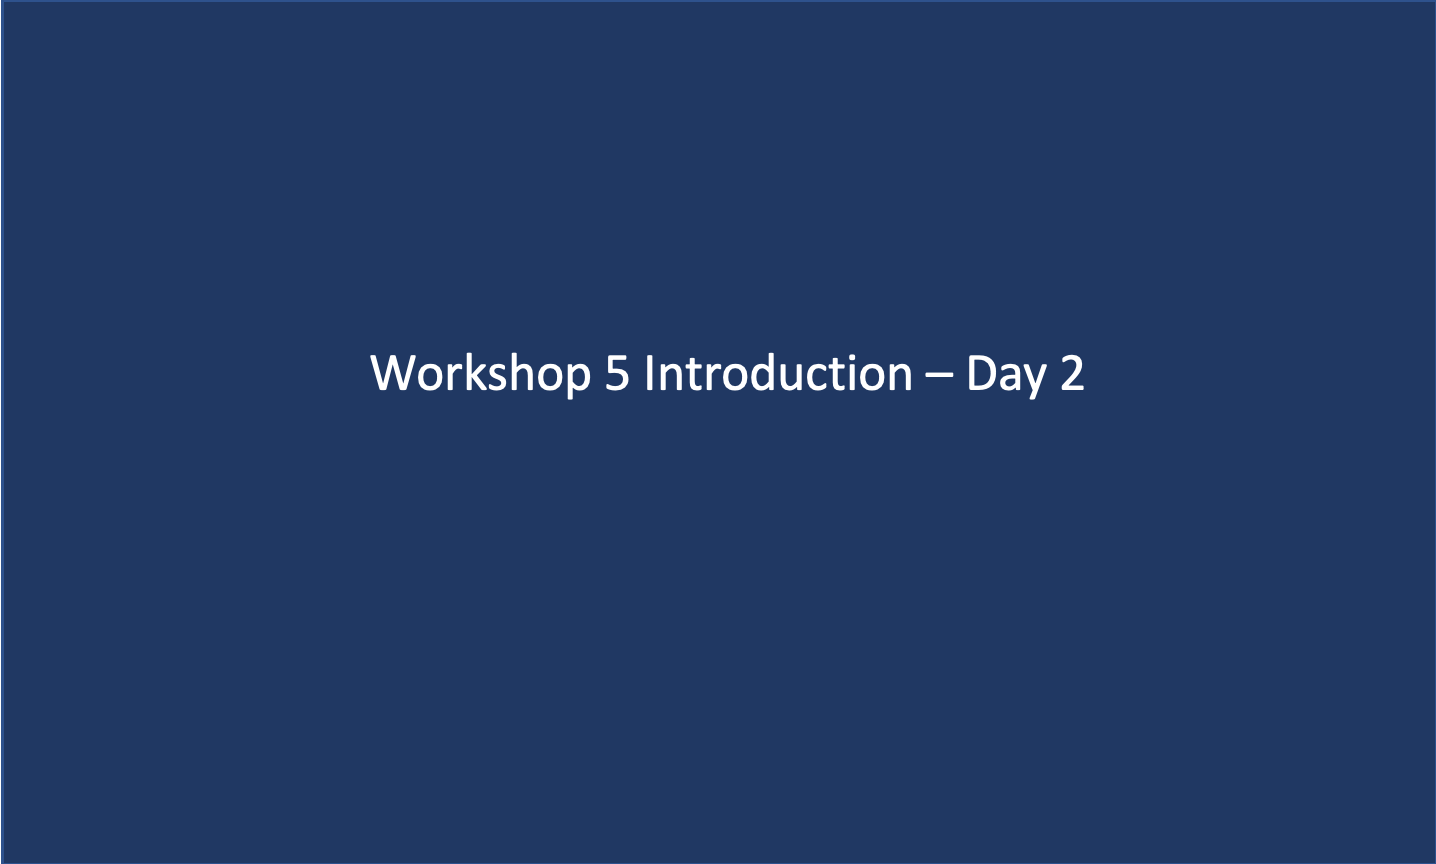 Workshop 5: Introduction to Day 2